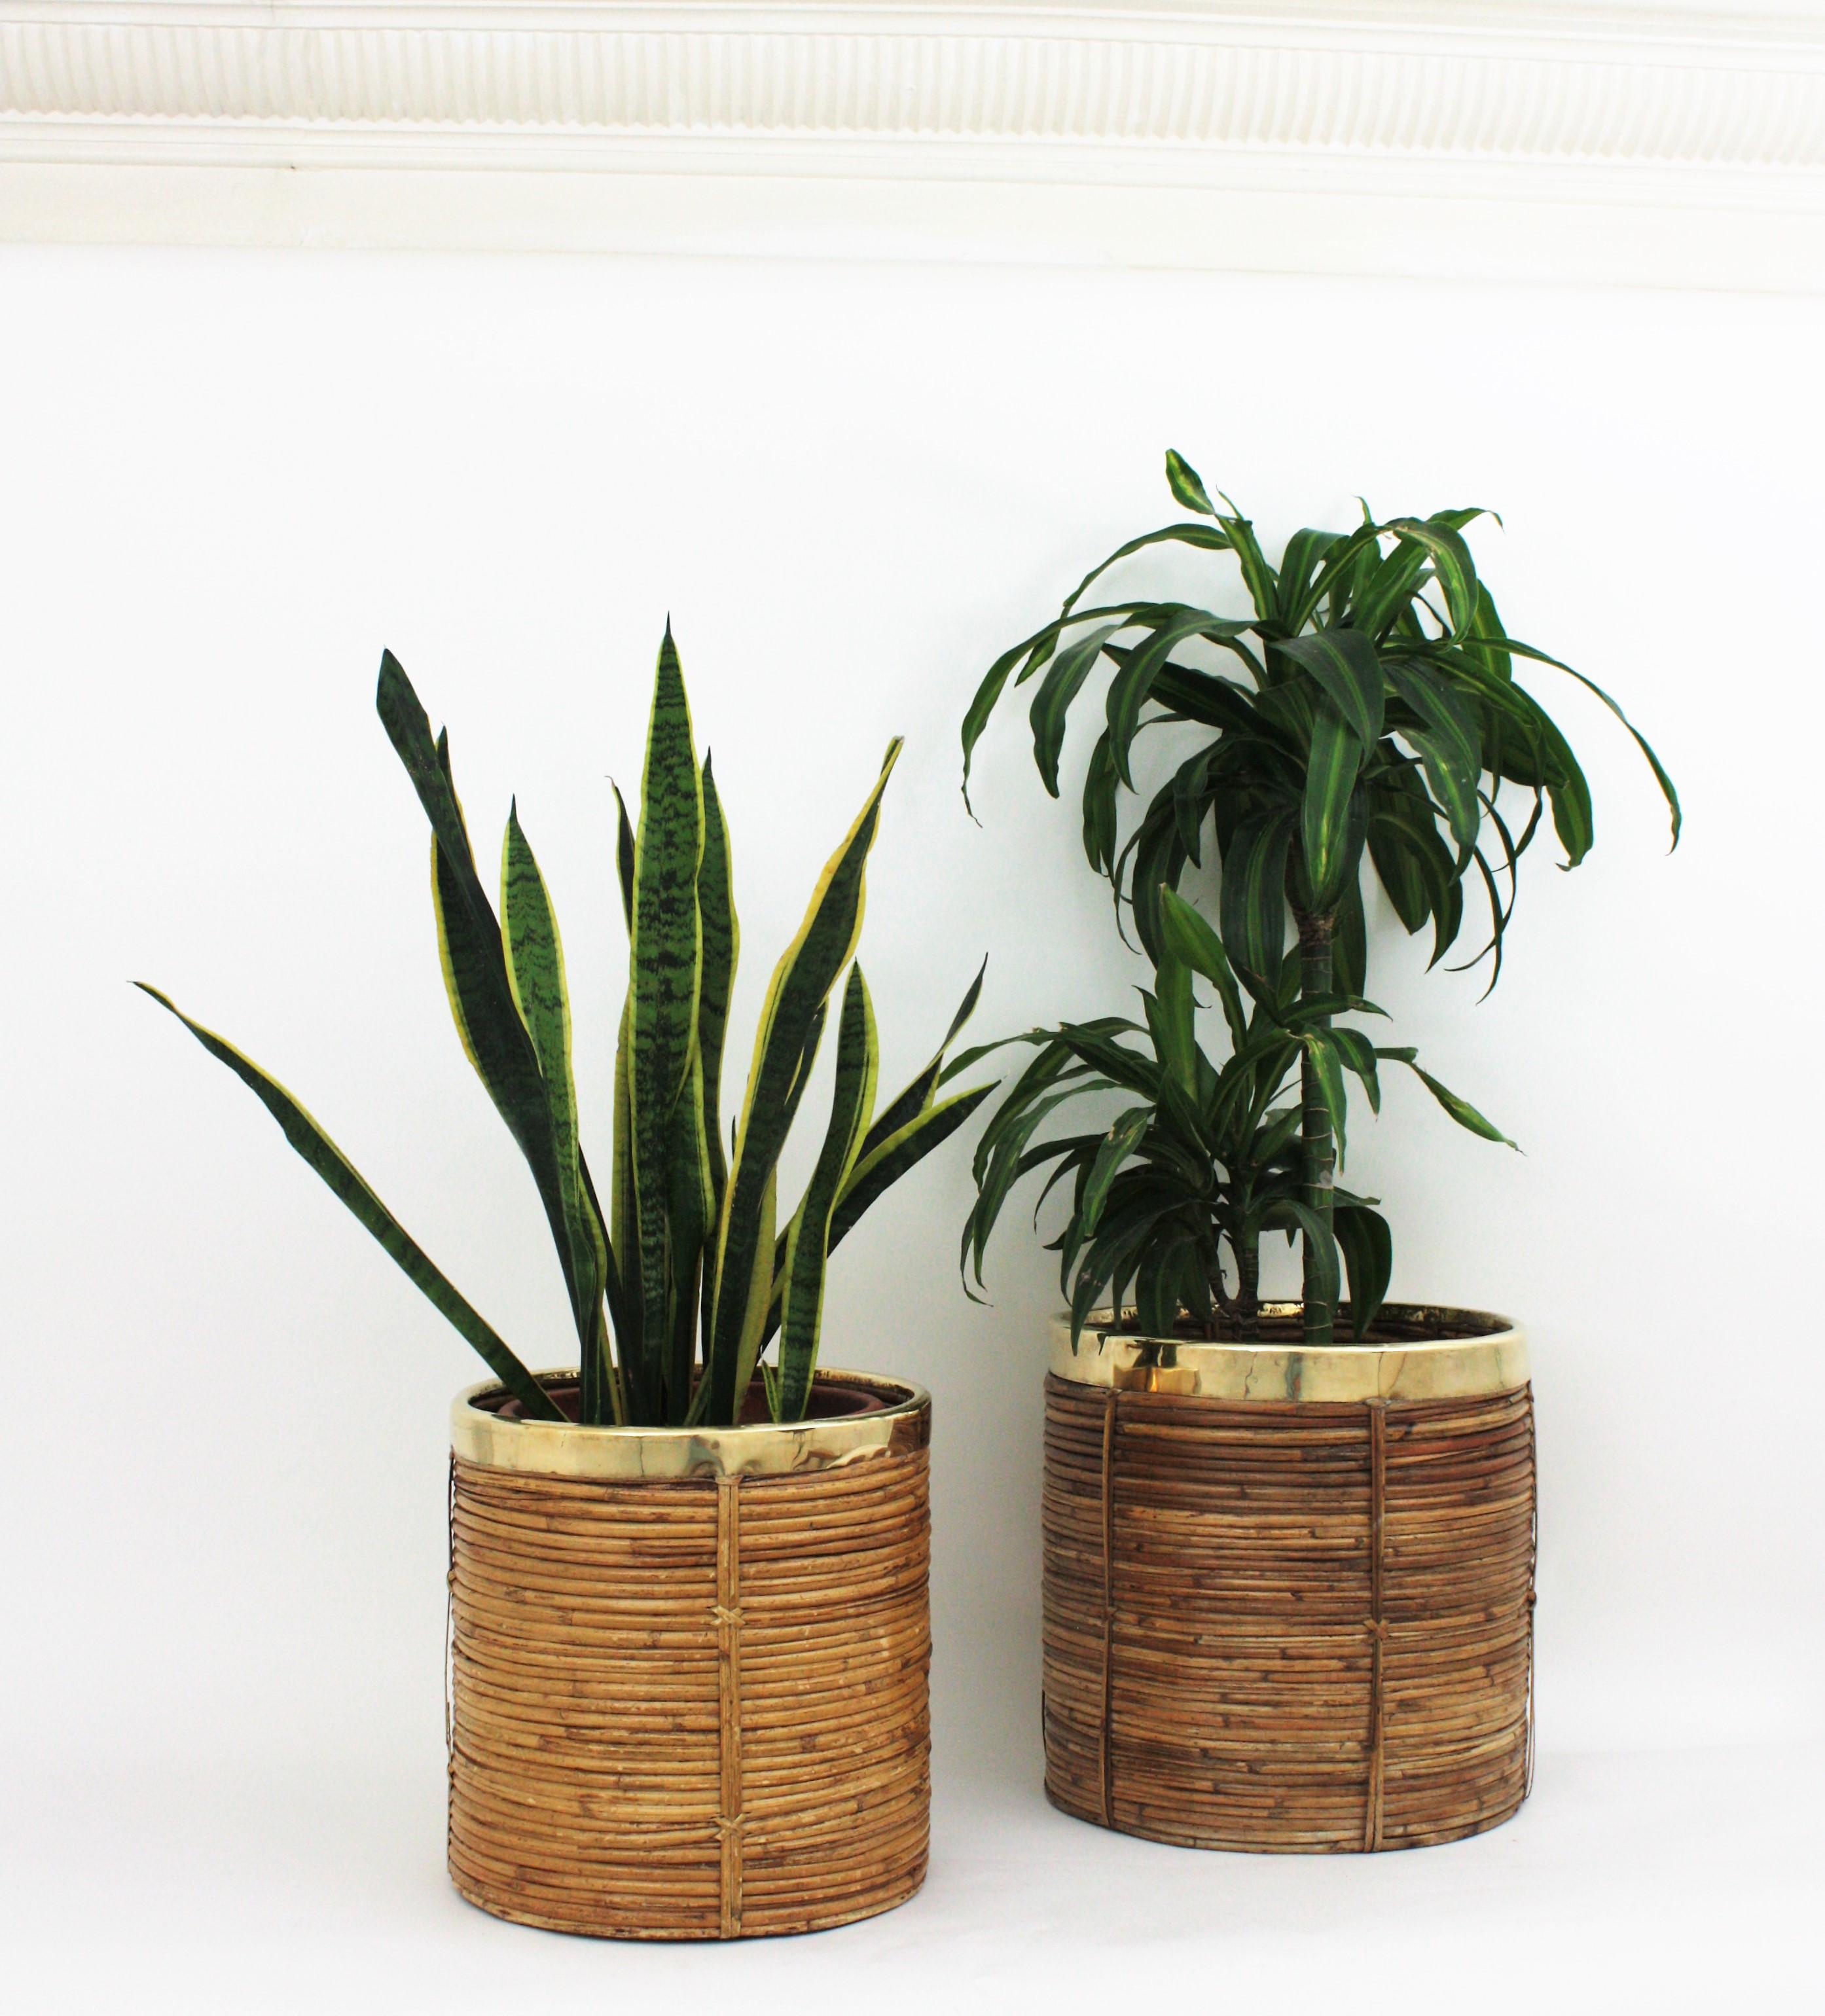 20th Century Pair of Midcentury Brass and Rattan Bamboo Round Planters or Baskets, 1970s